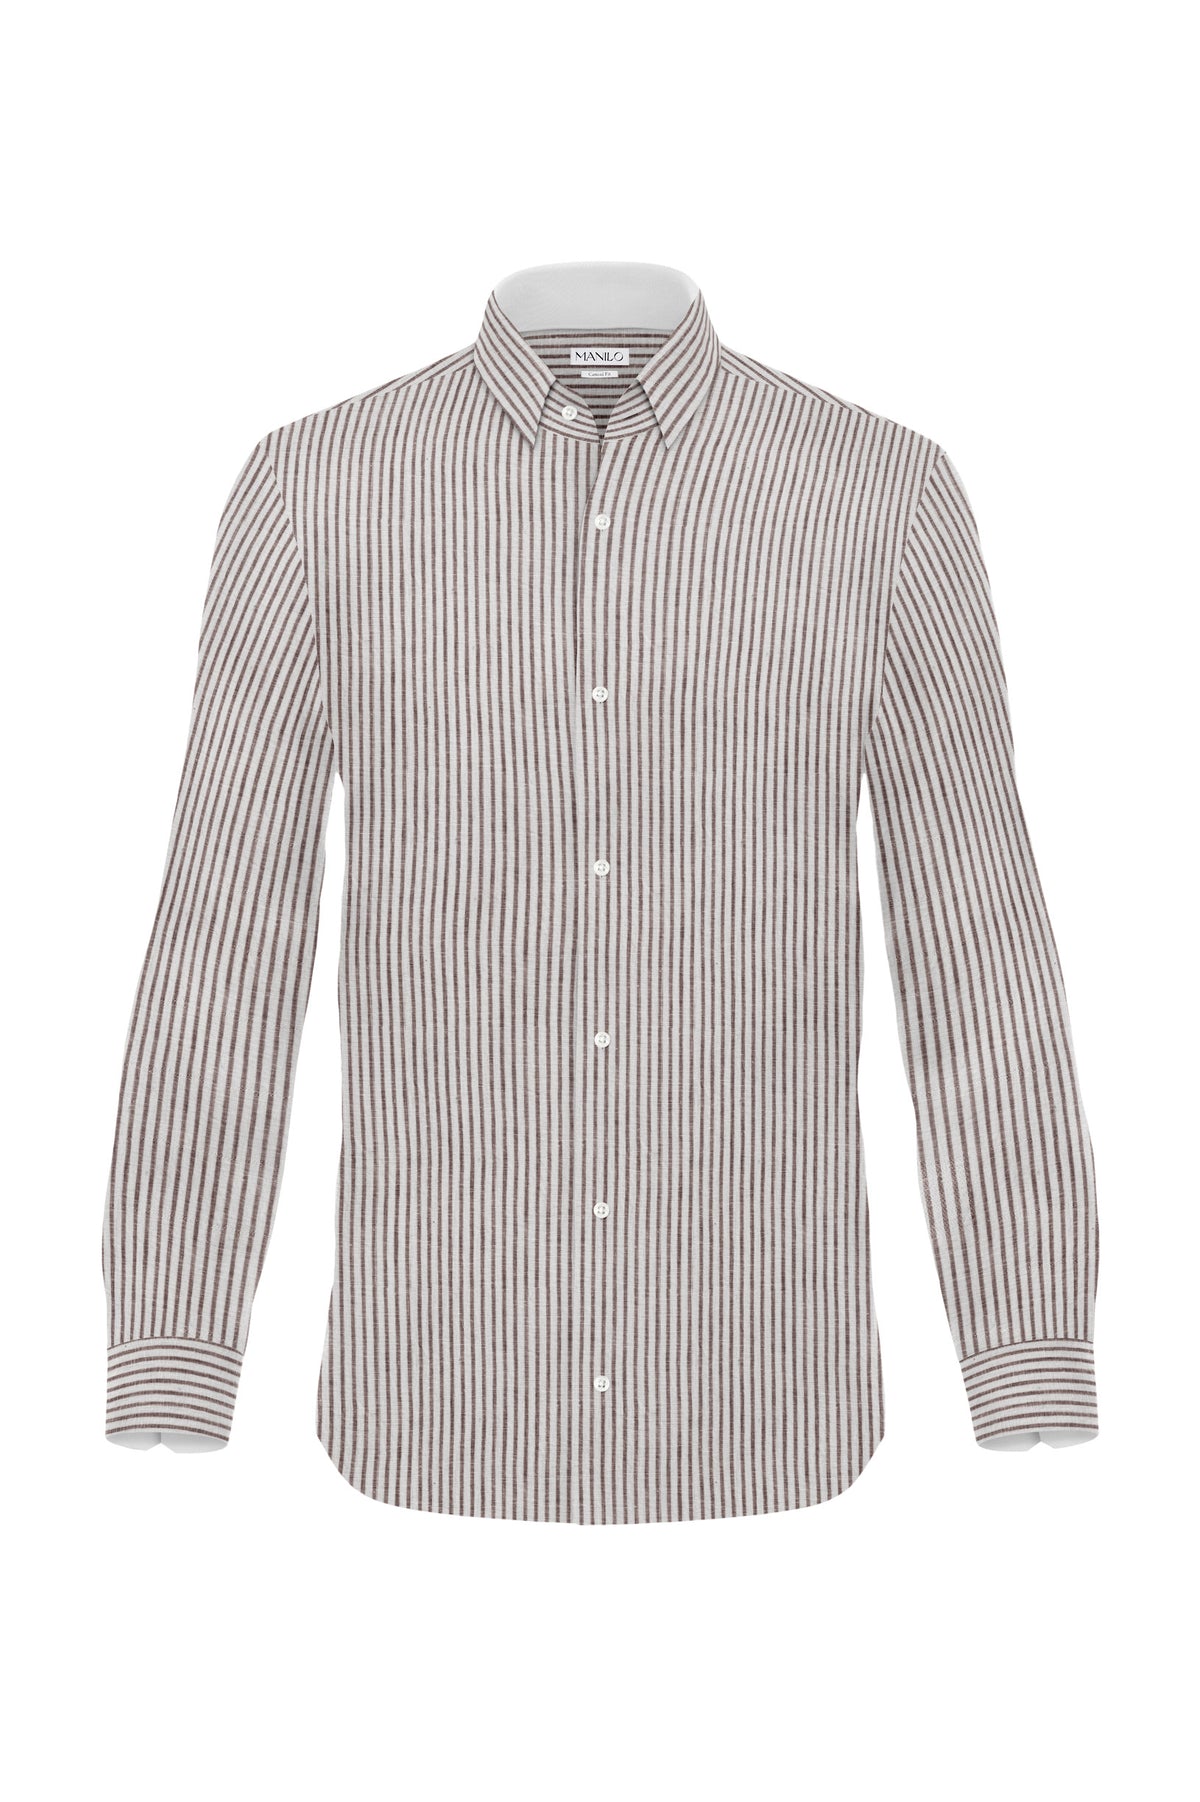 Linen shirt with stripes in brown (Art. 2263-C)